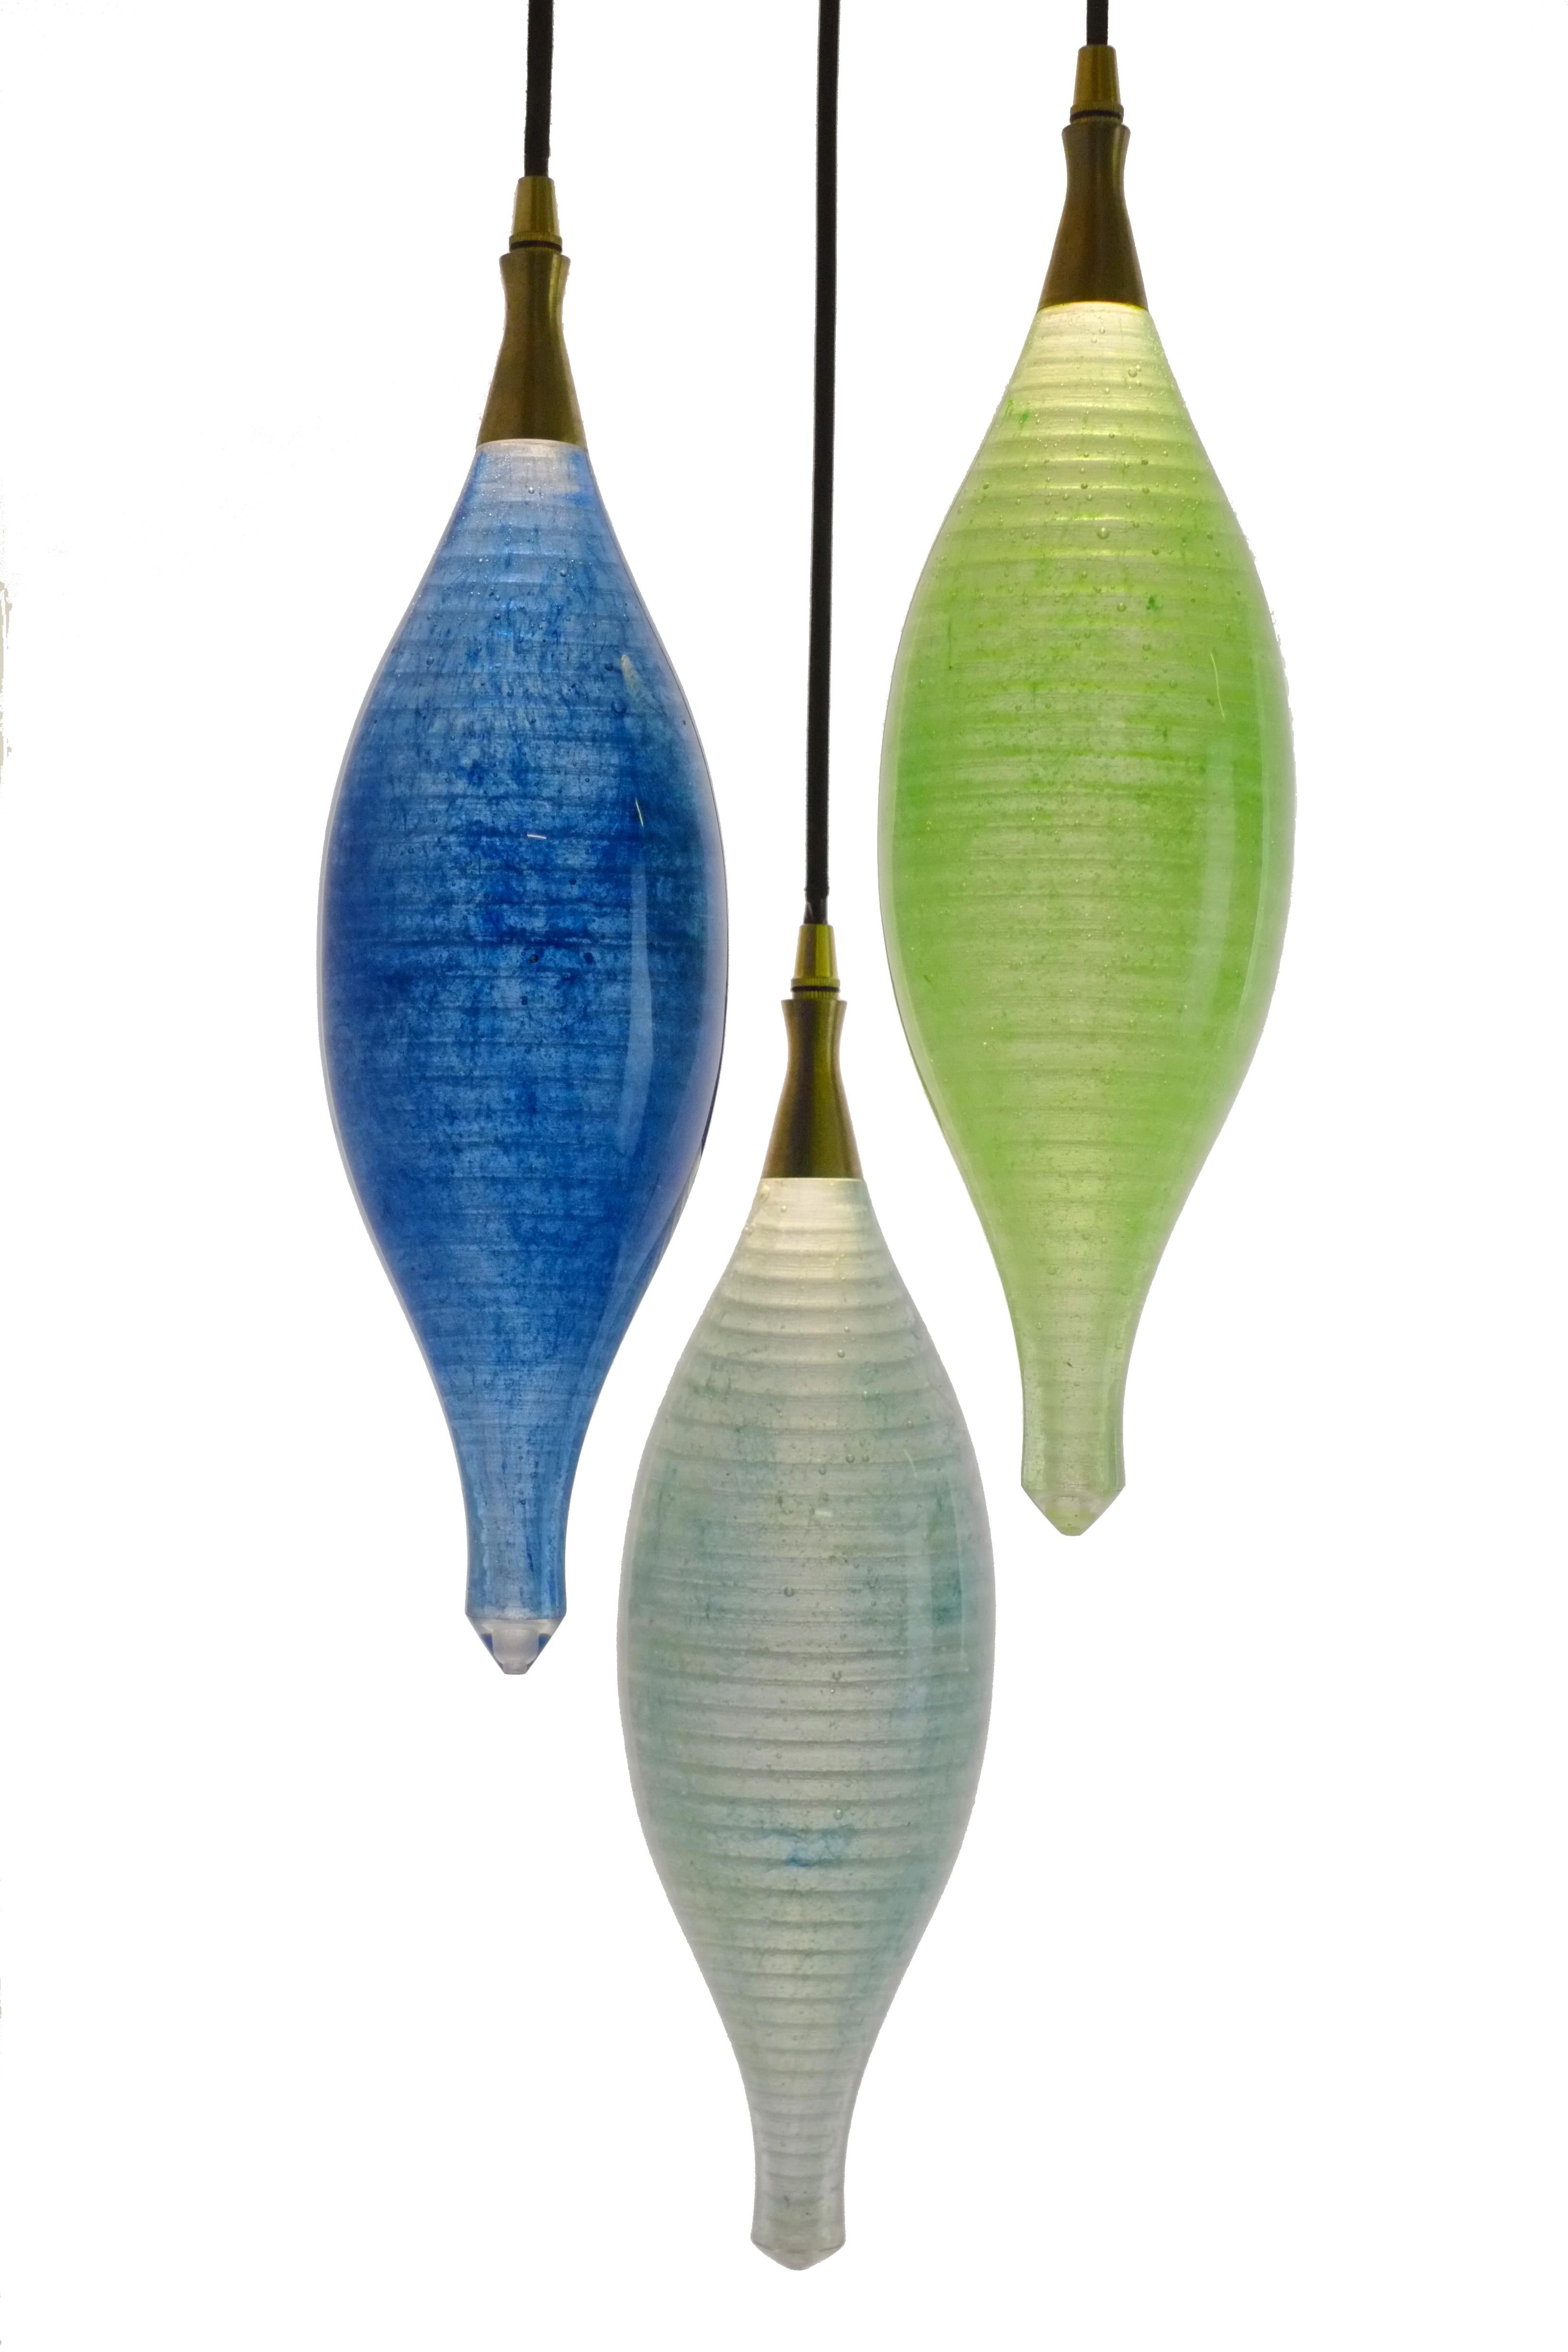 Cast Contemporary Glass Lamp: Semazen Crystal Hanging Pendant Light Citron Green For Sale